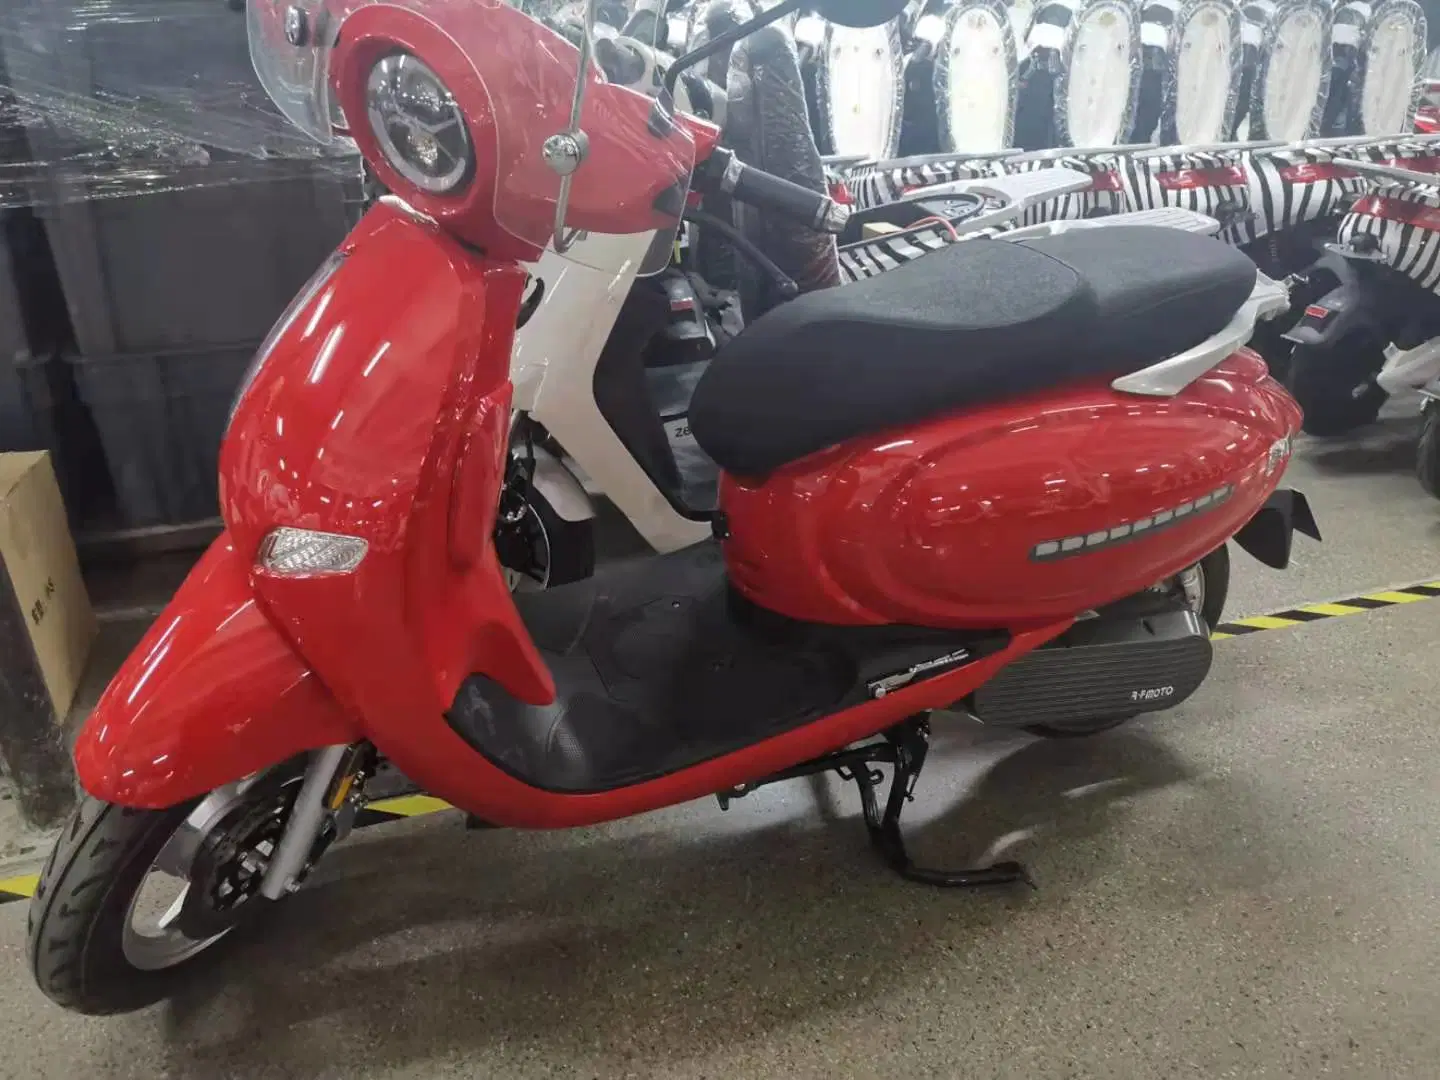 Gogo Elektro-Scooter Fahrrad Moped Scooter Lady E-Scooter verwenden